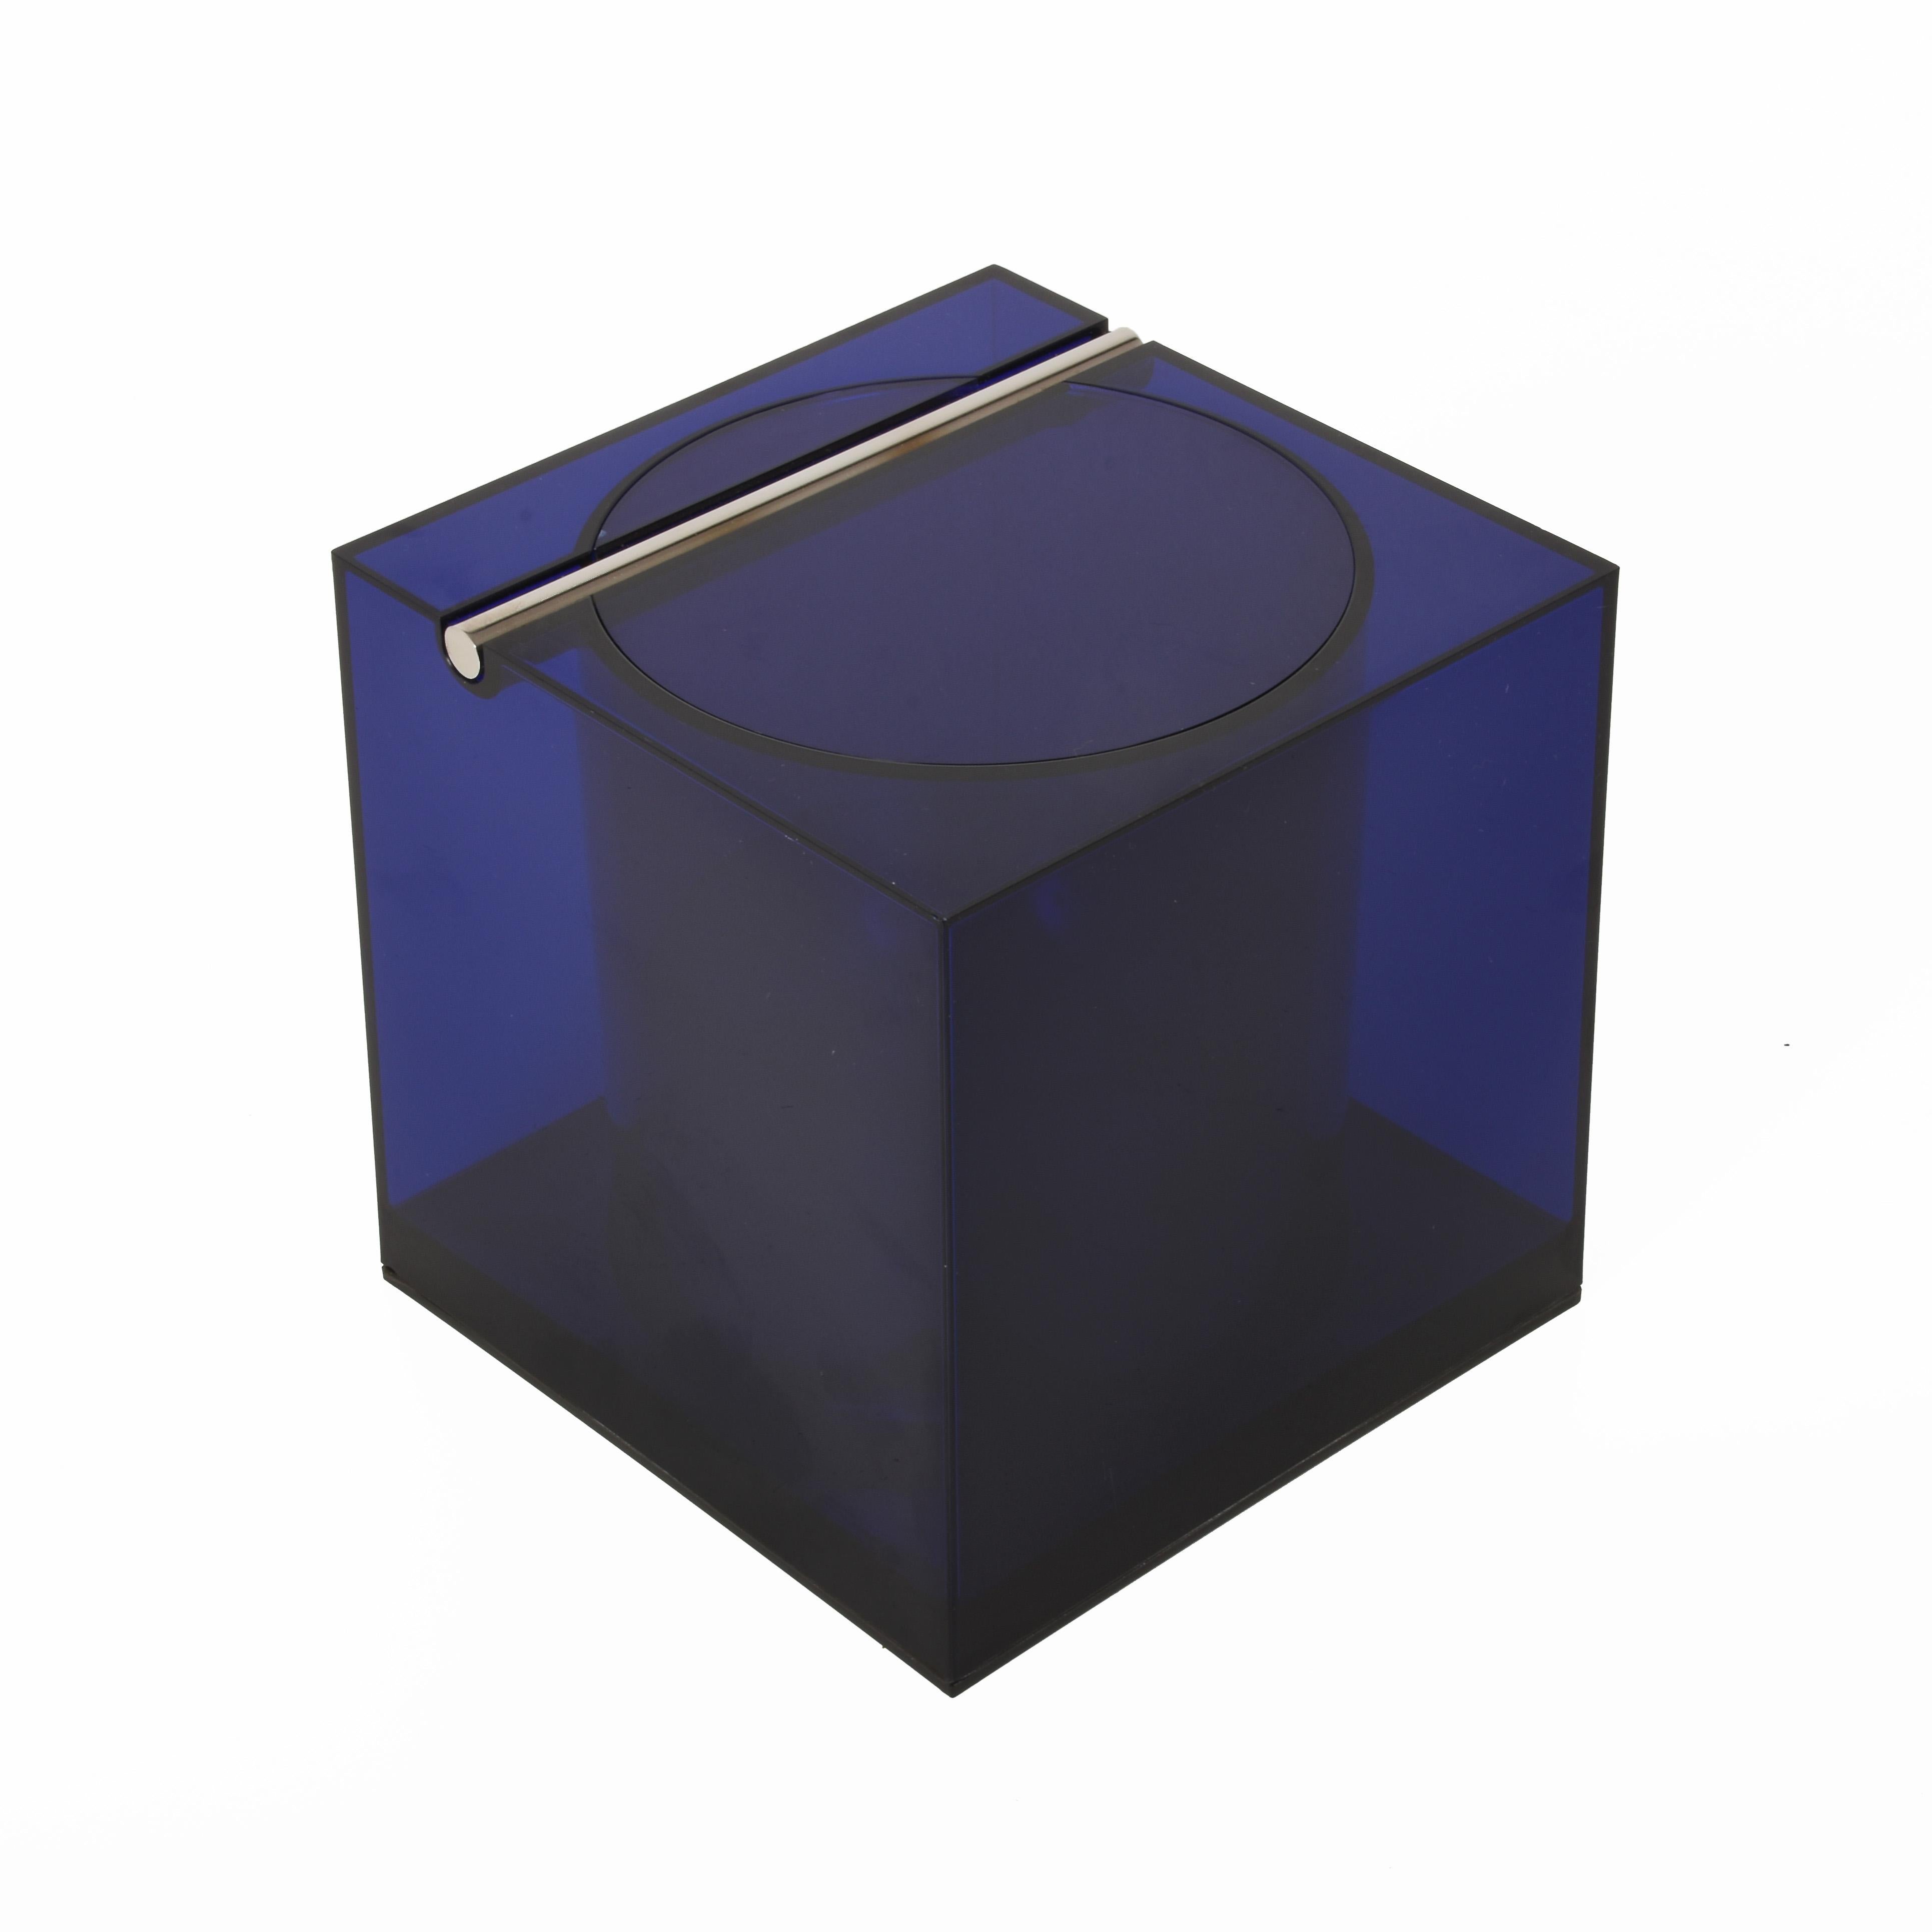 Wonderful midcentury blue acrylic cubic ice bucket for Di Cini & Nils. 

This amazing item was designed by the Italian Studio Opi, more precisely by Franco Bettonica and Mario Melocchi, in 1974.

An elegant piece that will enrich a bar or